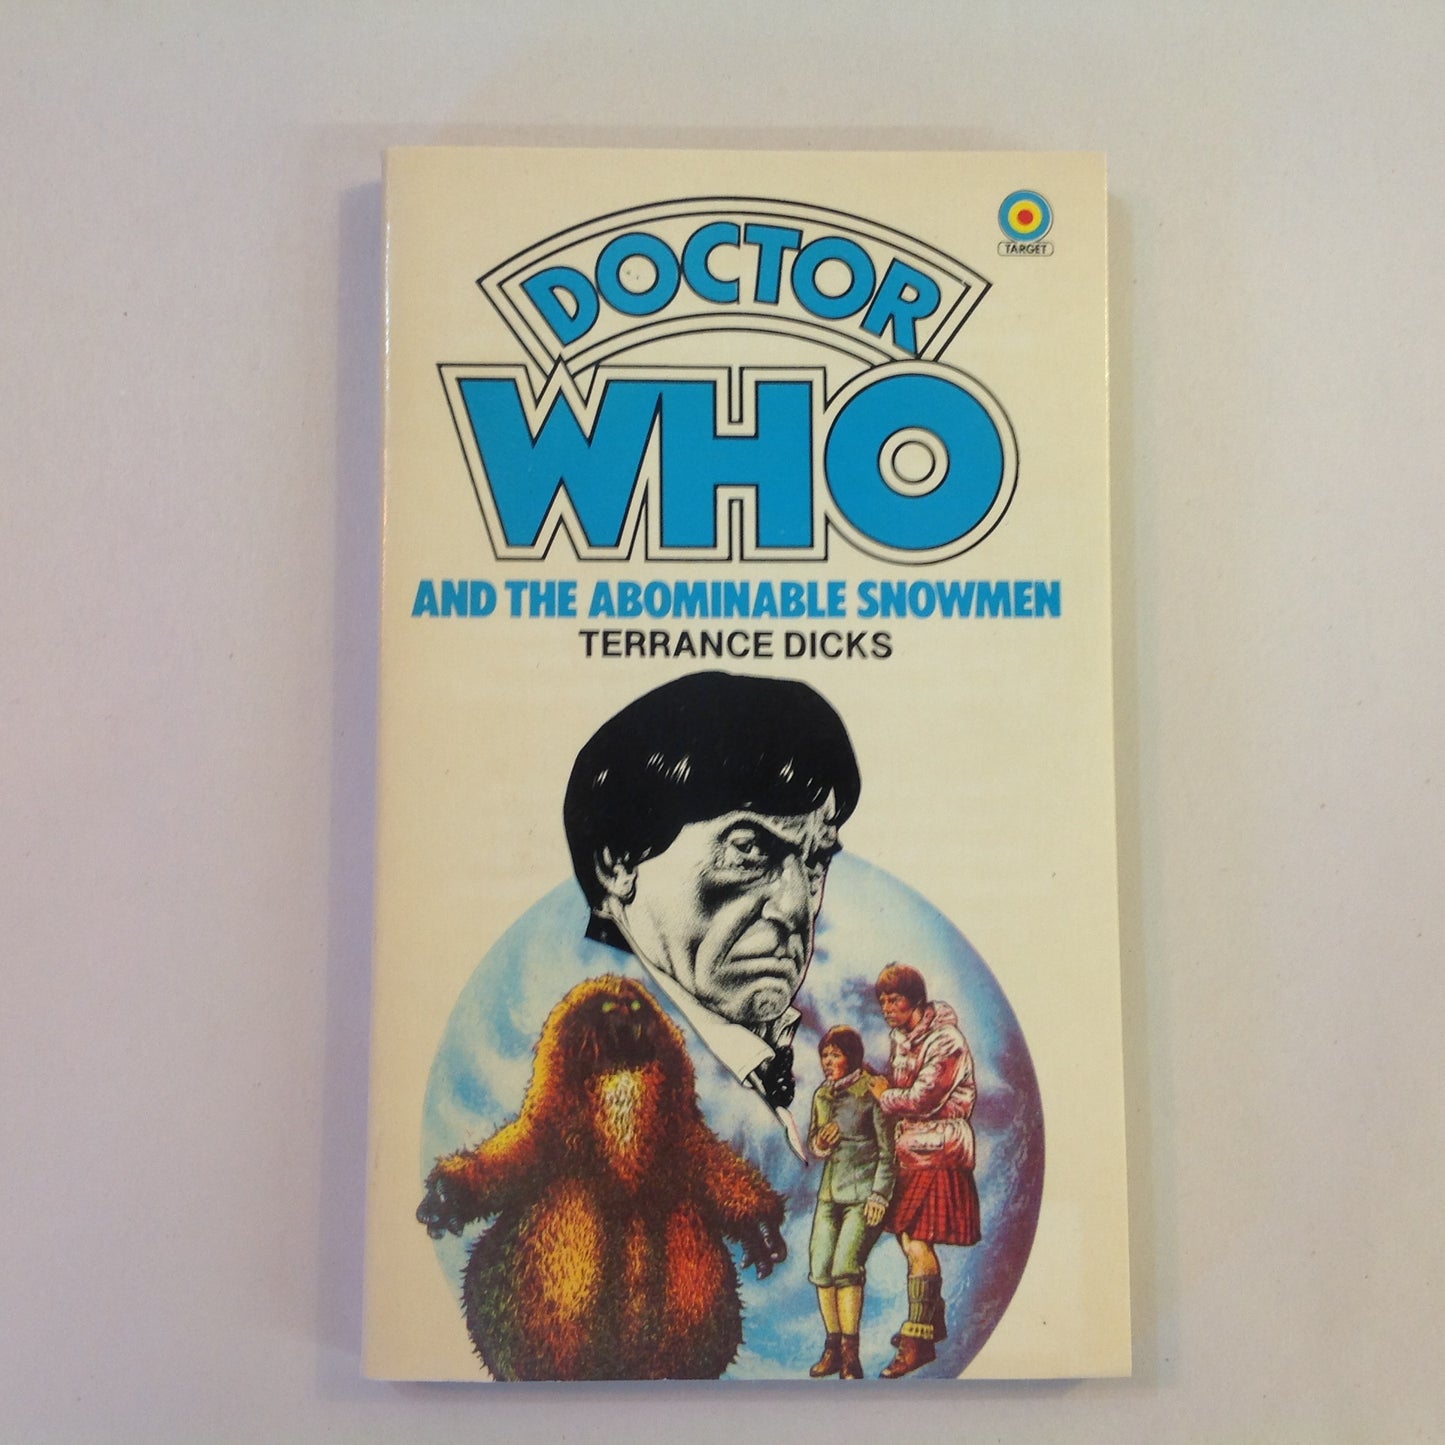 Vintage 1982 Mass Market Paperback Doctor Who and the Abominable Snowmen Terrance Dicks